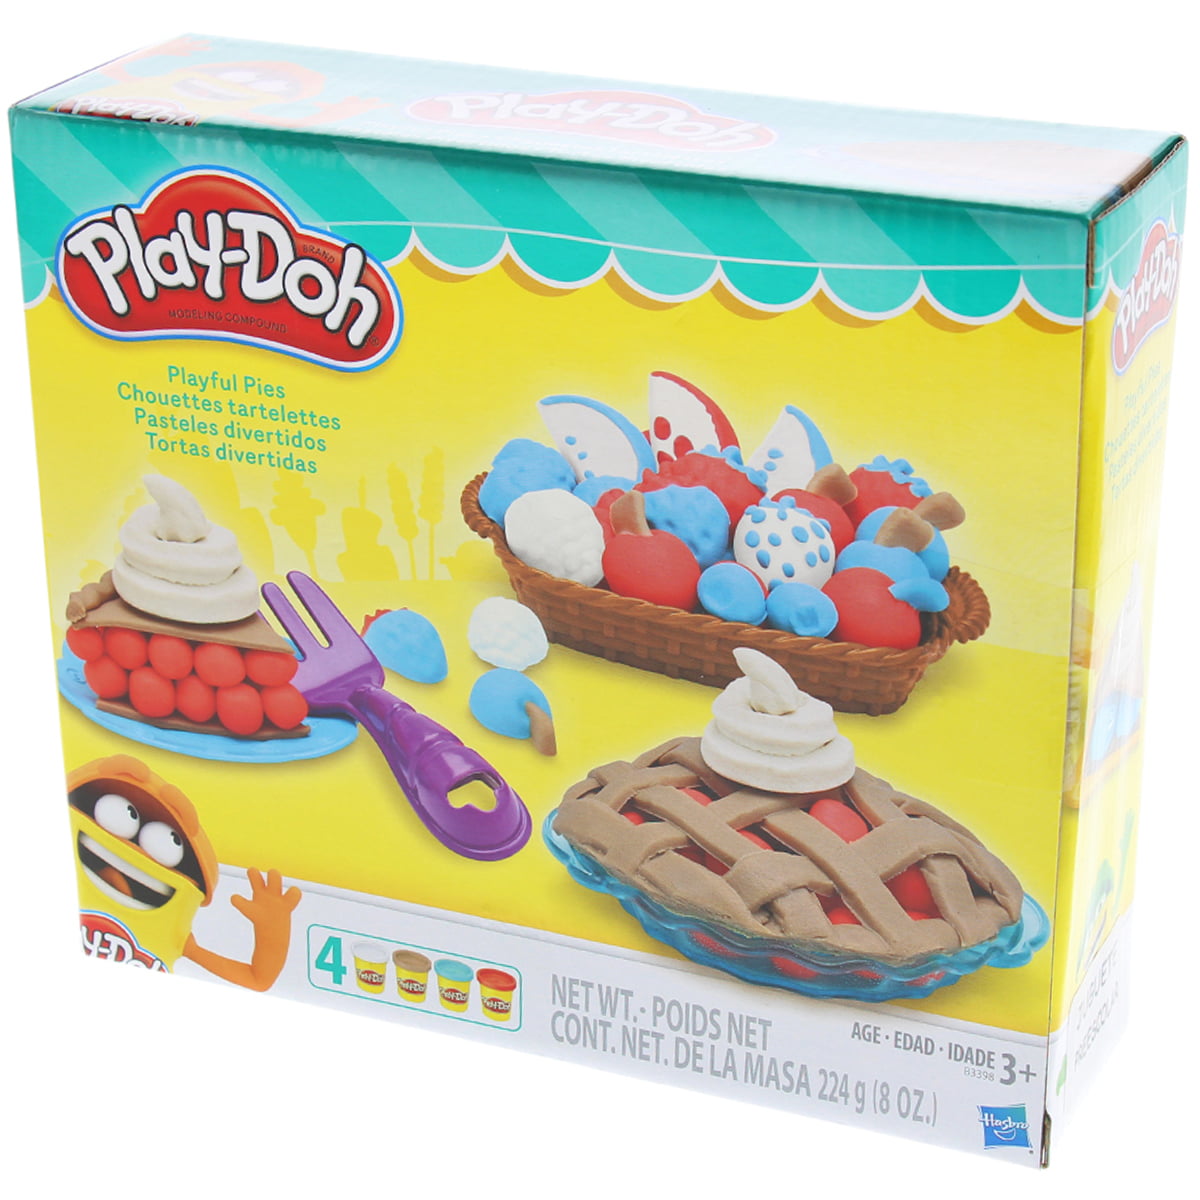 New Play-Doh Playful Pies Playset w/ 4 Cans Of Dough & Moulds Official 